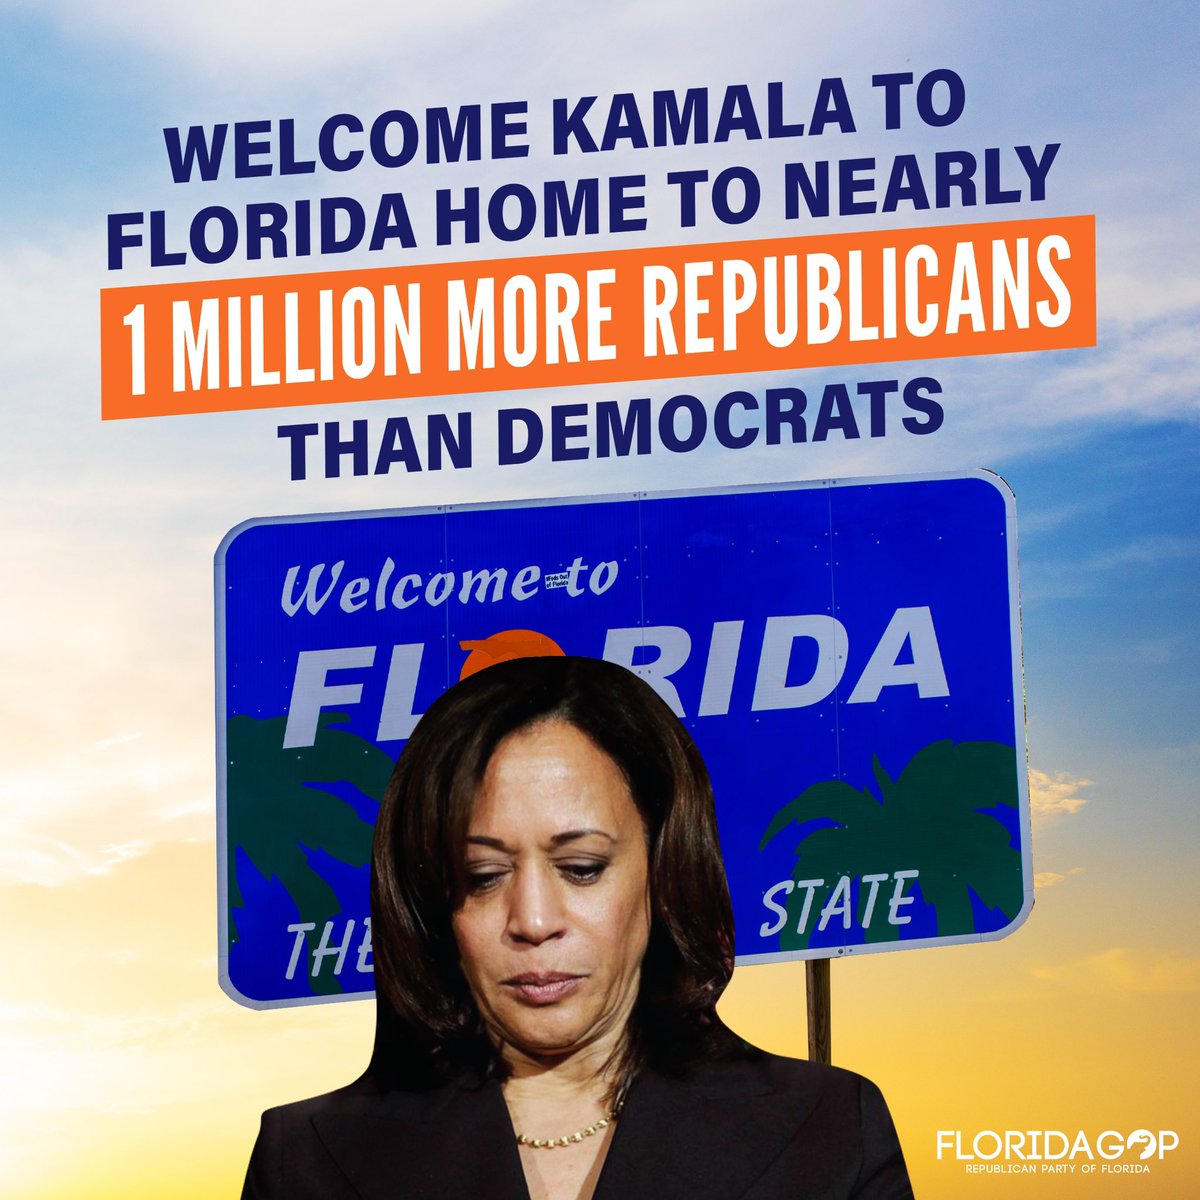 In January of 2020 there were 250,000 more registered Democrats than Republicans, today Florida is RED and home to nearly 1 million more Republicans than Dems. Floridians have made it CLEAR that Biden and Kamala’s policies aren’t welcome here.